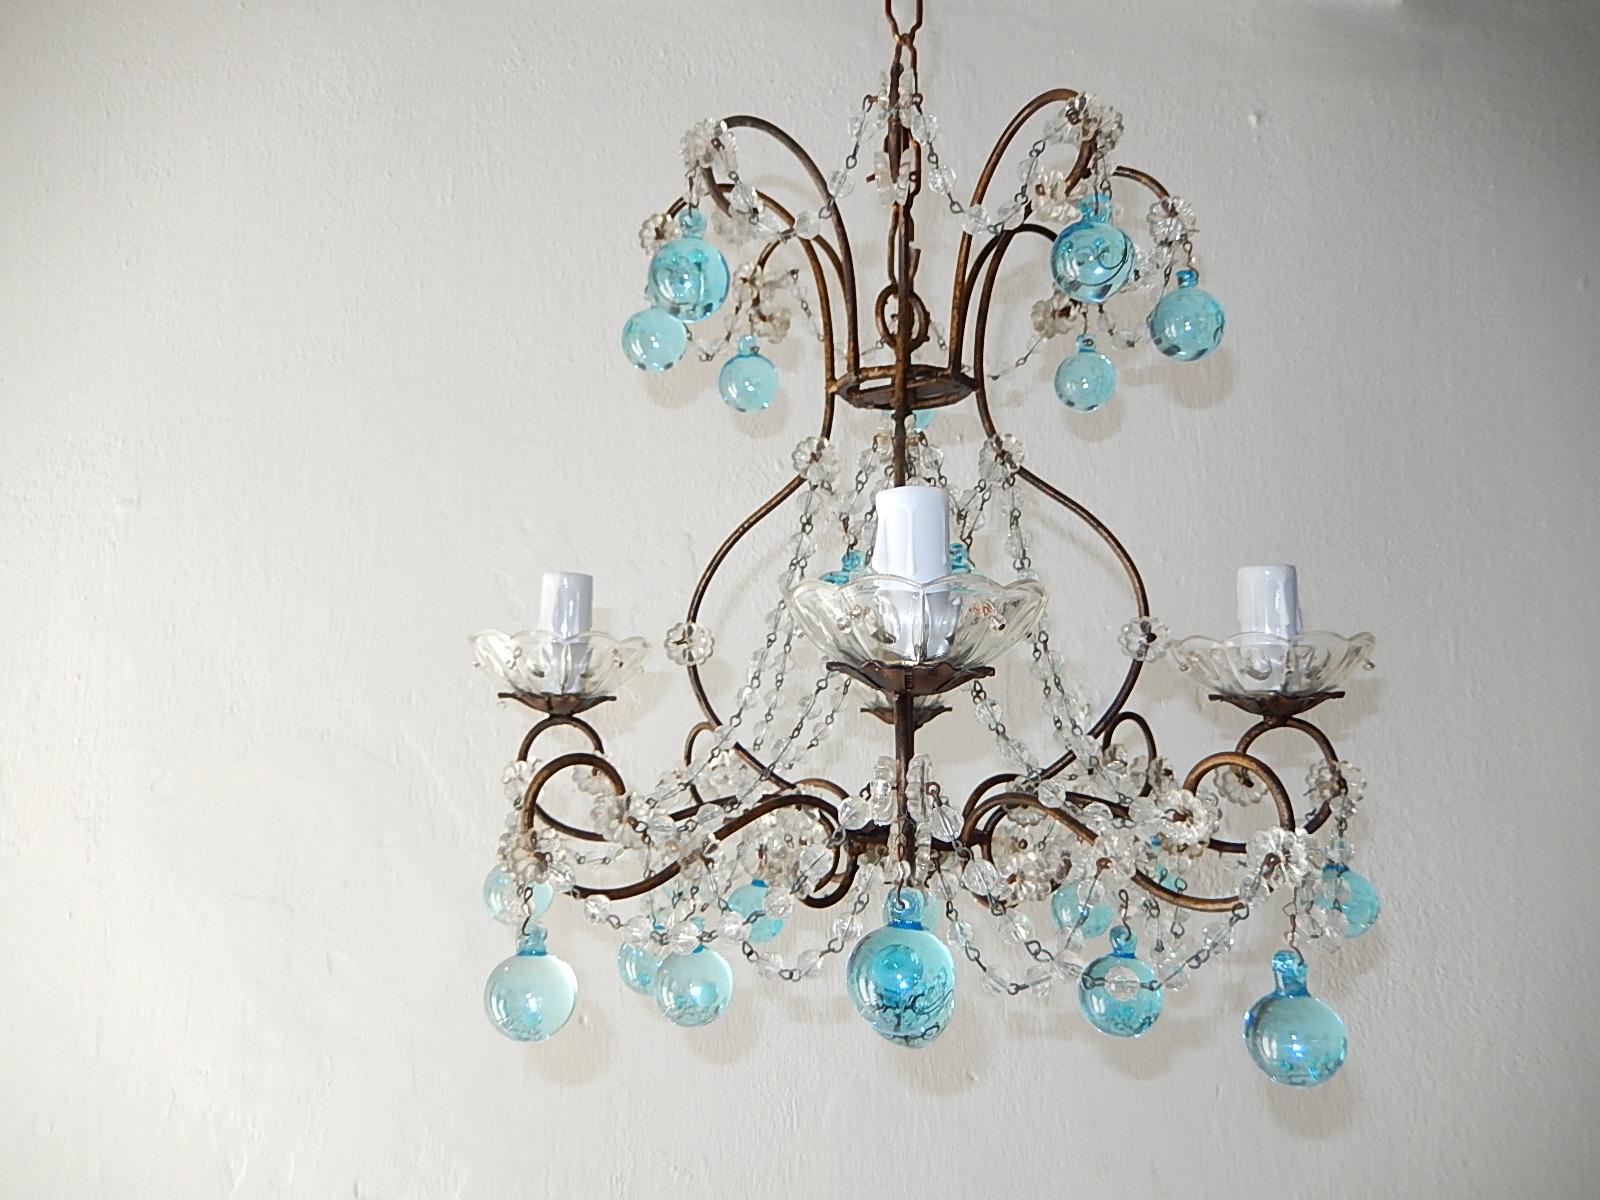 Italian Florentine Crystal Swags Aqua Blue Murano Drops Chandelier In Good Condition For Sale In Firenze, Toscana